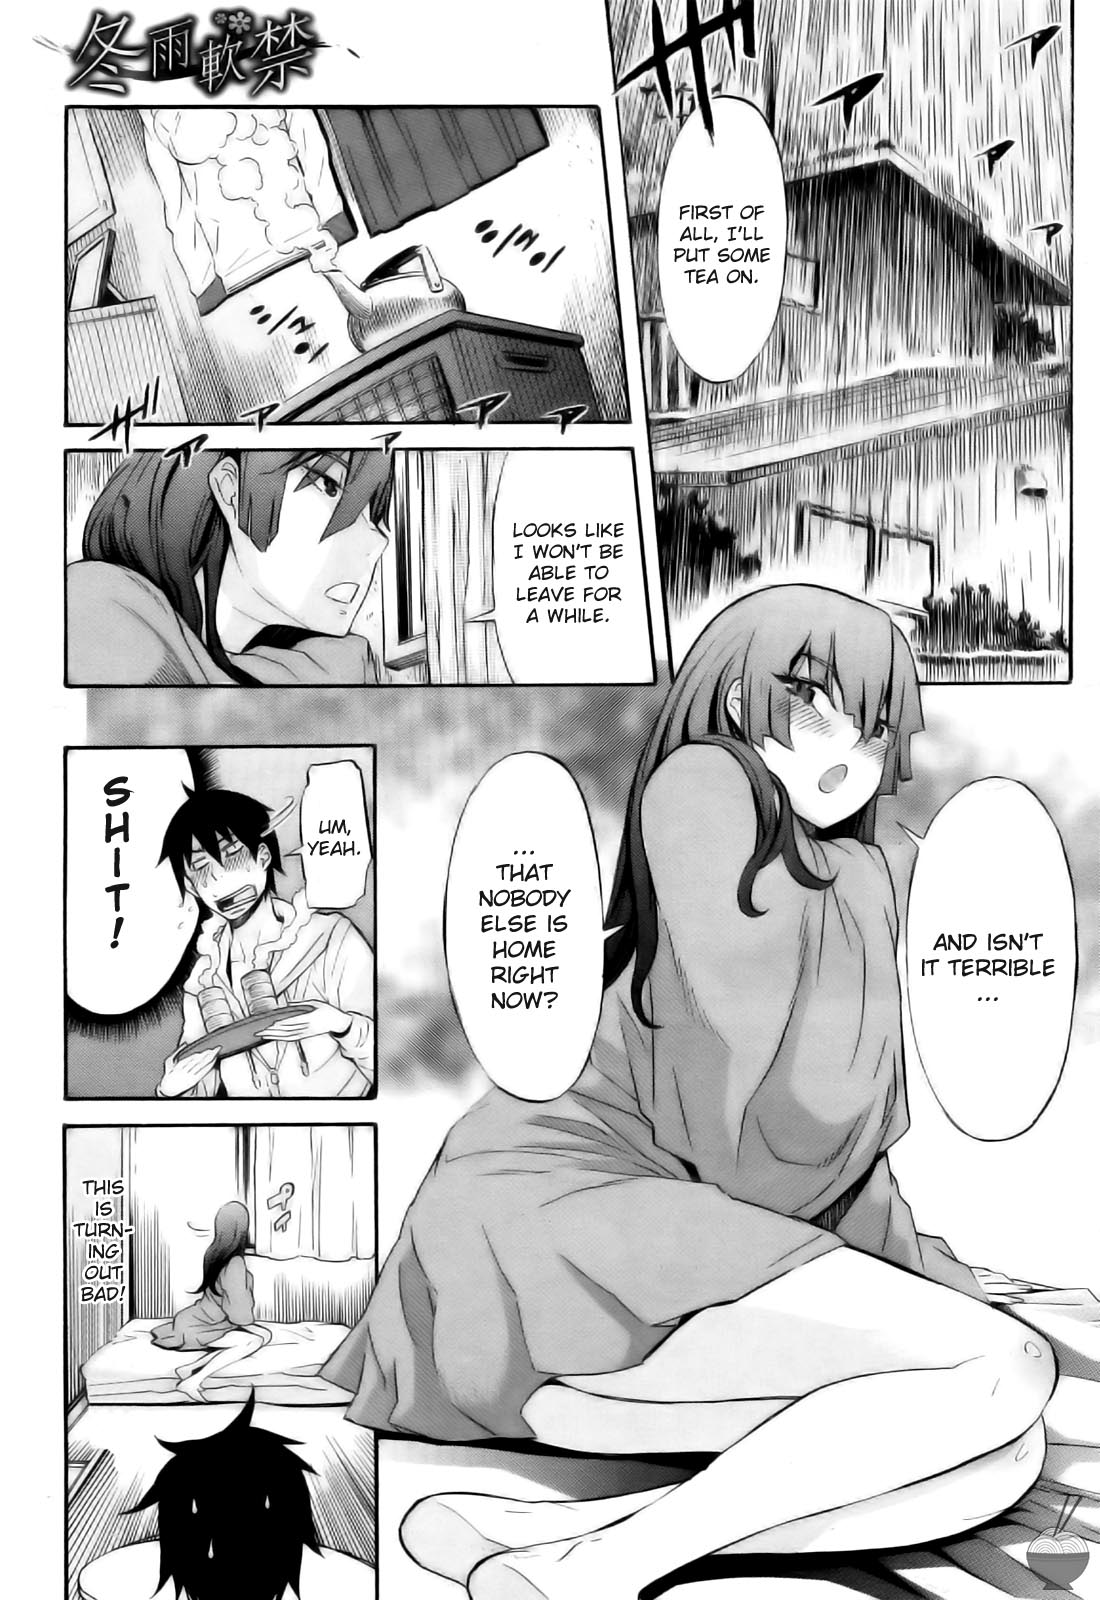 [D.P] Winter Rain House Arrest [English] [Soba-Scans] page 3 full